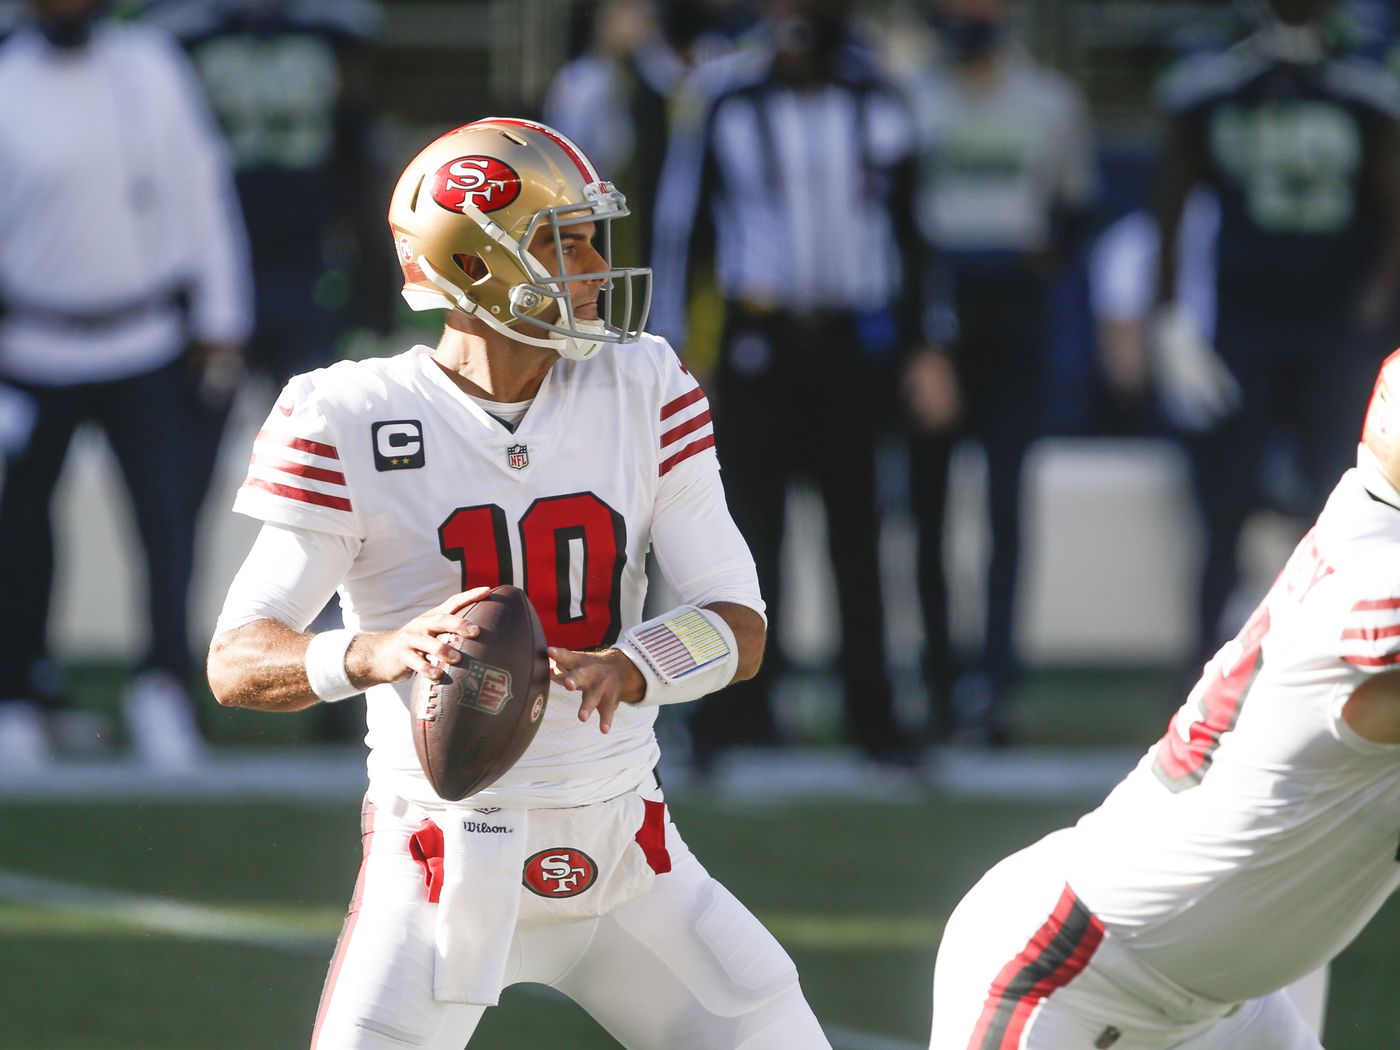 PFF ranks 49ers QB Jimmy Garoppolo as the 22nd best starter in the